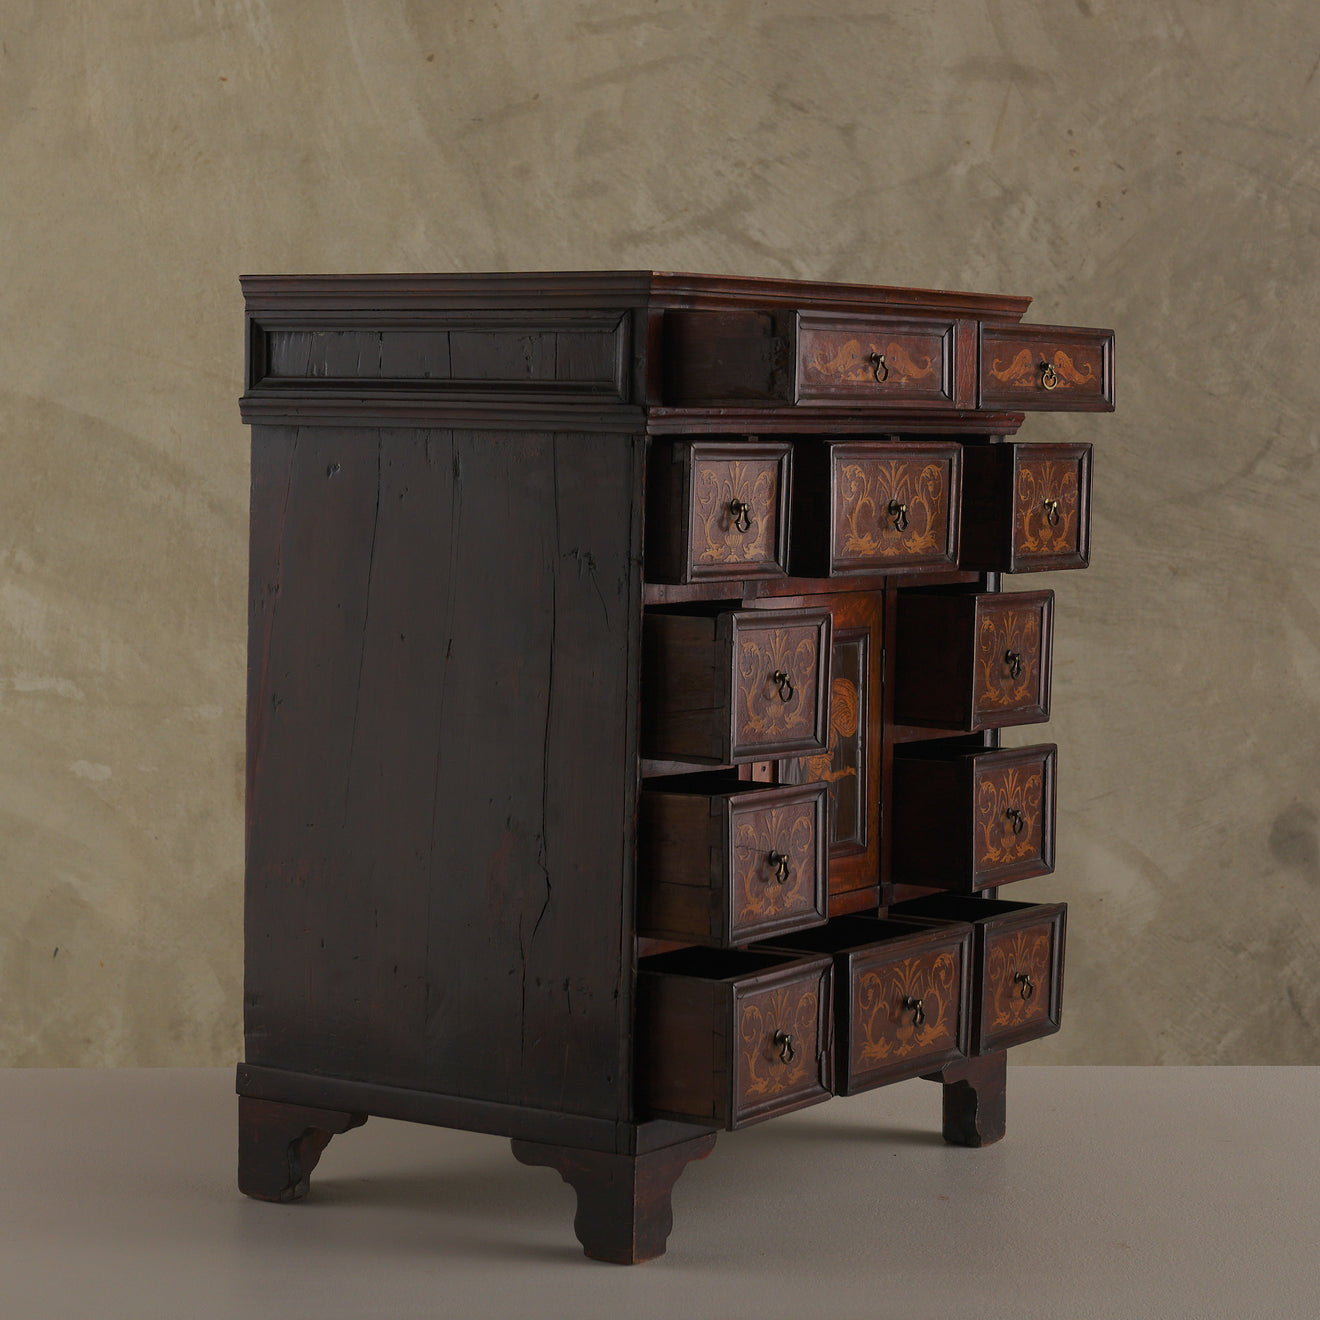 TABLE TOP CABINET WITH HIDDEN COMPARTMENT